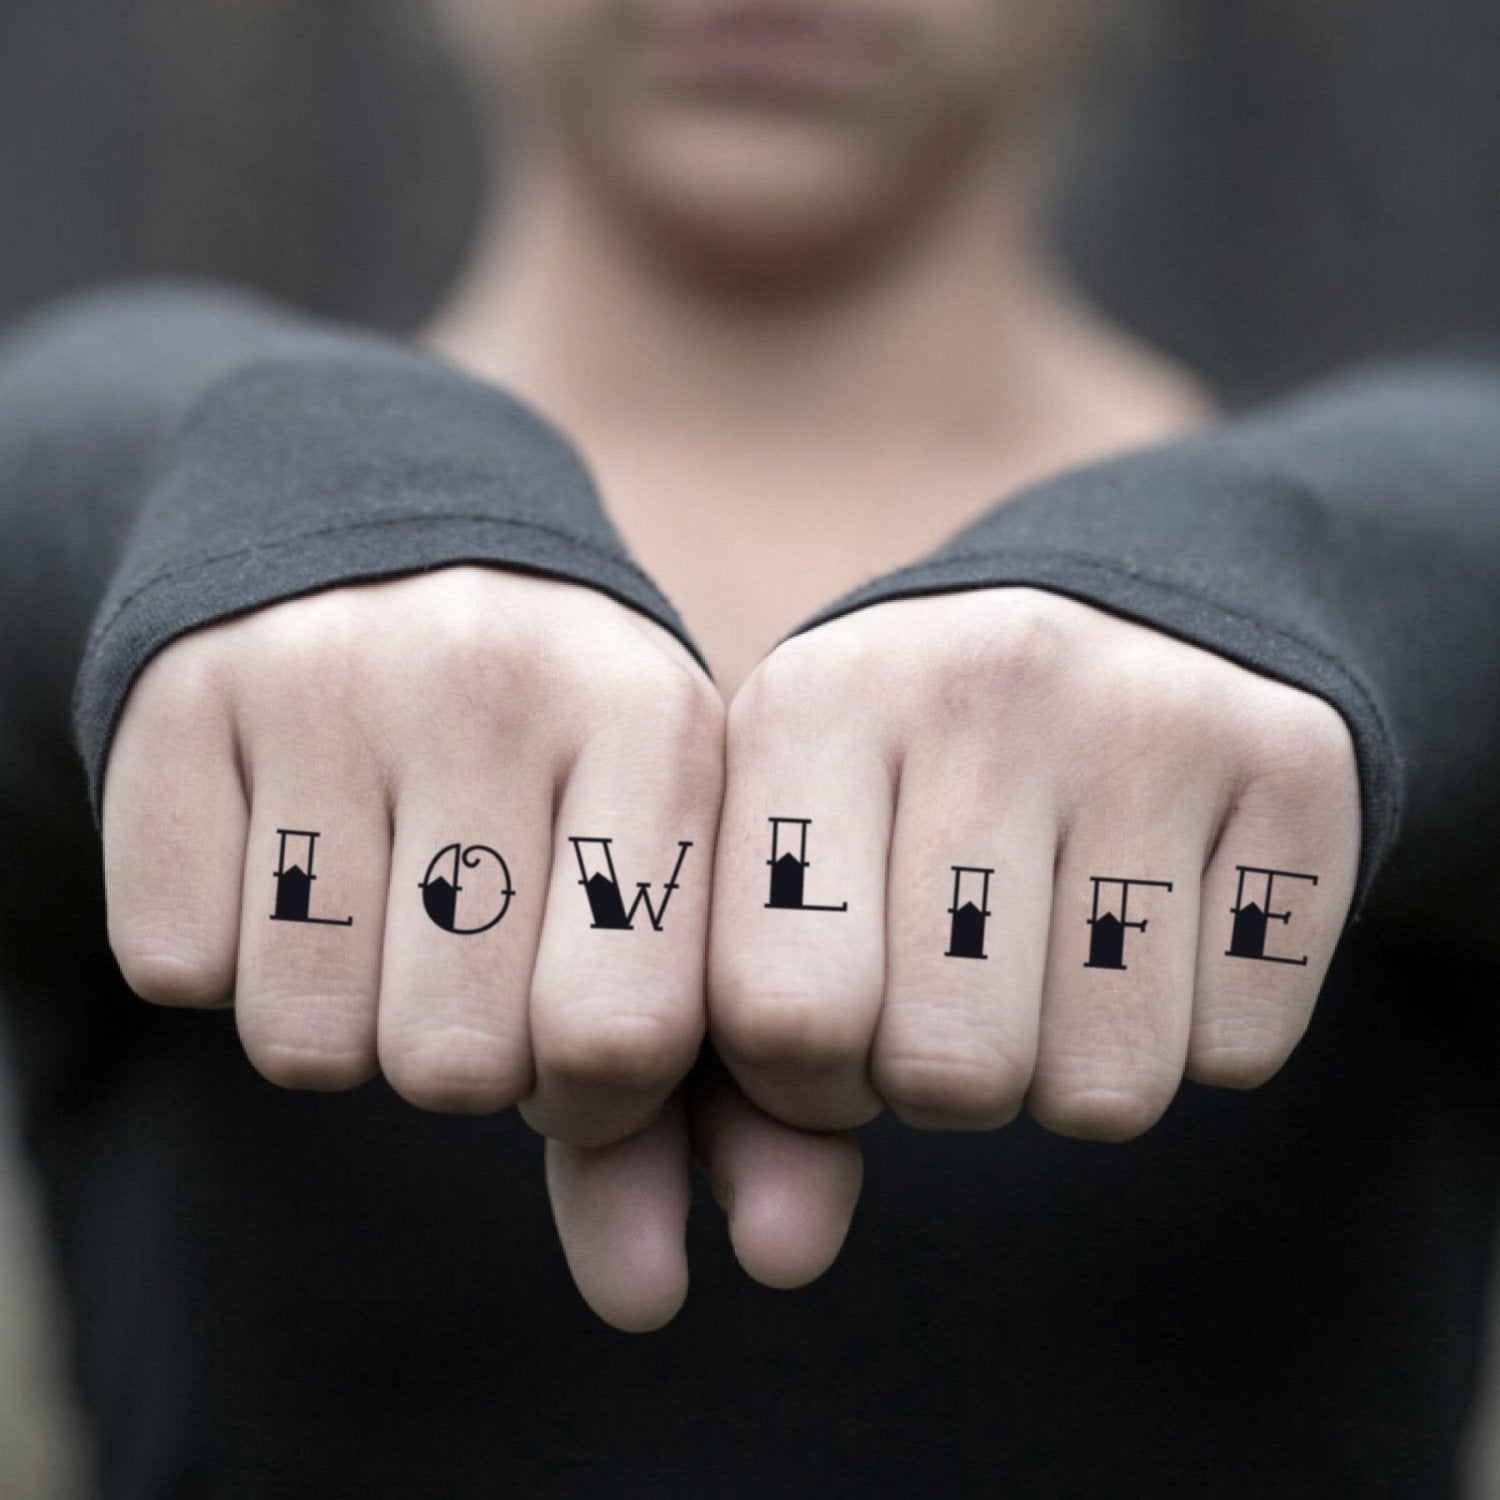 fake small low life lettering temporary tattoo sticker design idea on finger